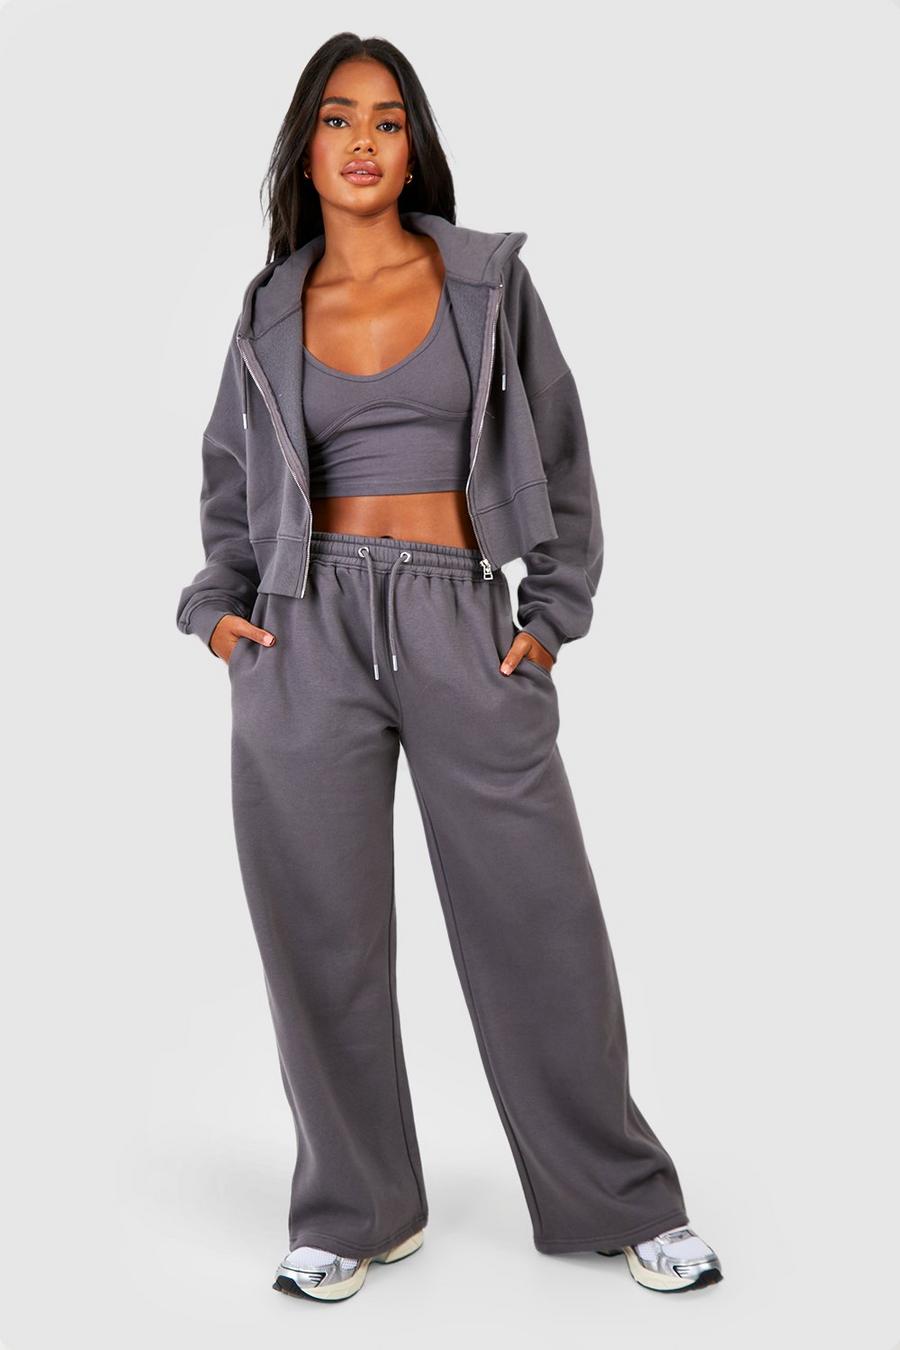 Charcoal Seam Detail Crop Top 3 Piece Hooded Tracksuit image number 1